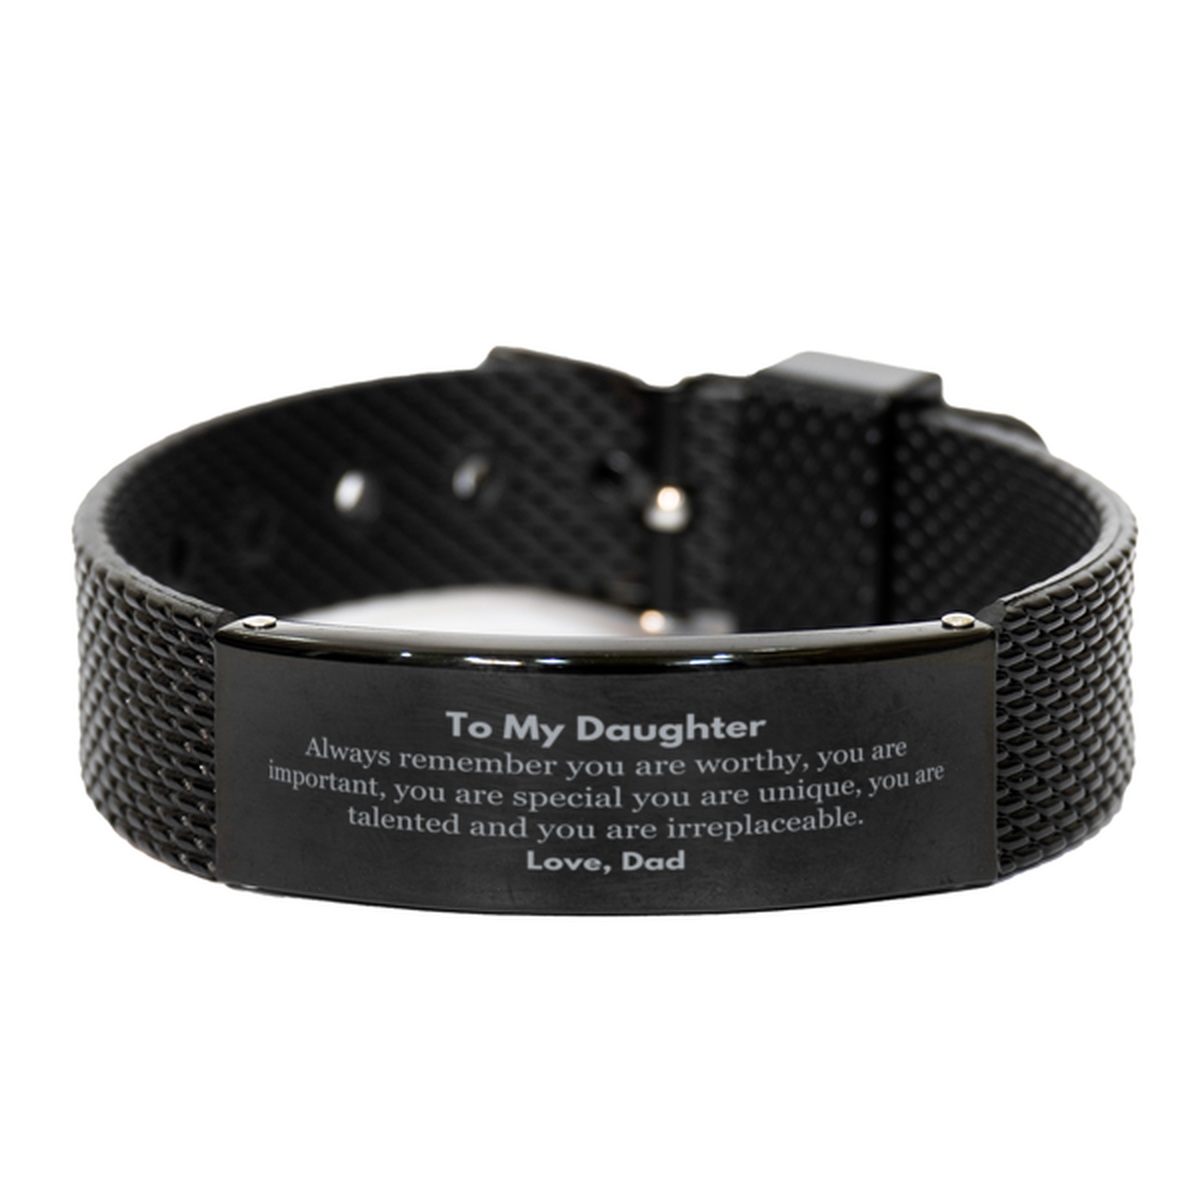 Daughter Birthday Gifts from Dad, Inspirational Black Shark Mesh Bracelet for Daughter Christmas Graduation Gifts for Daughter Always remember you are worthy, you are important. Love, Dad